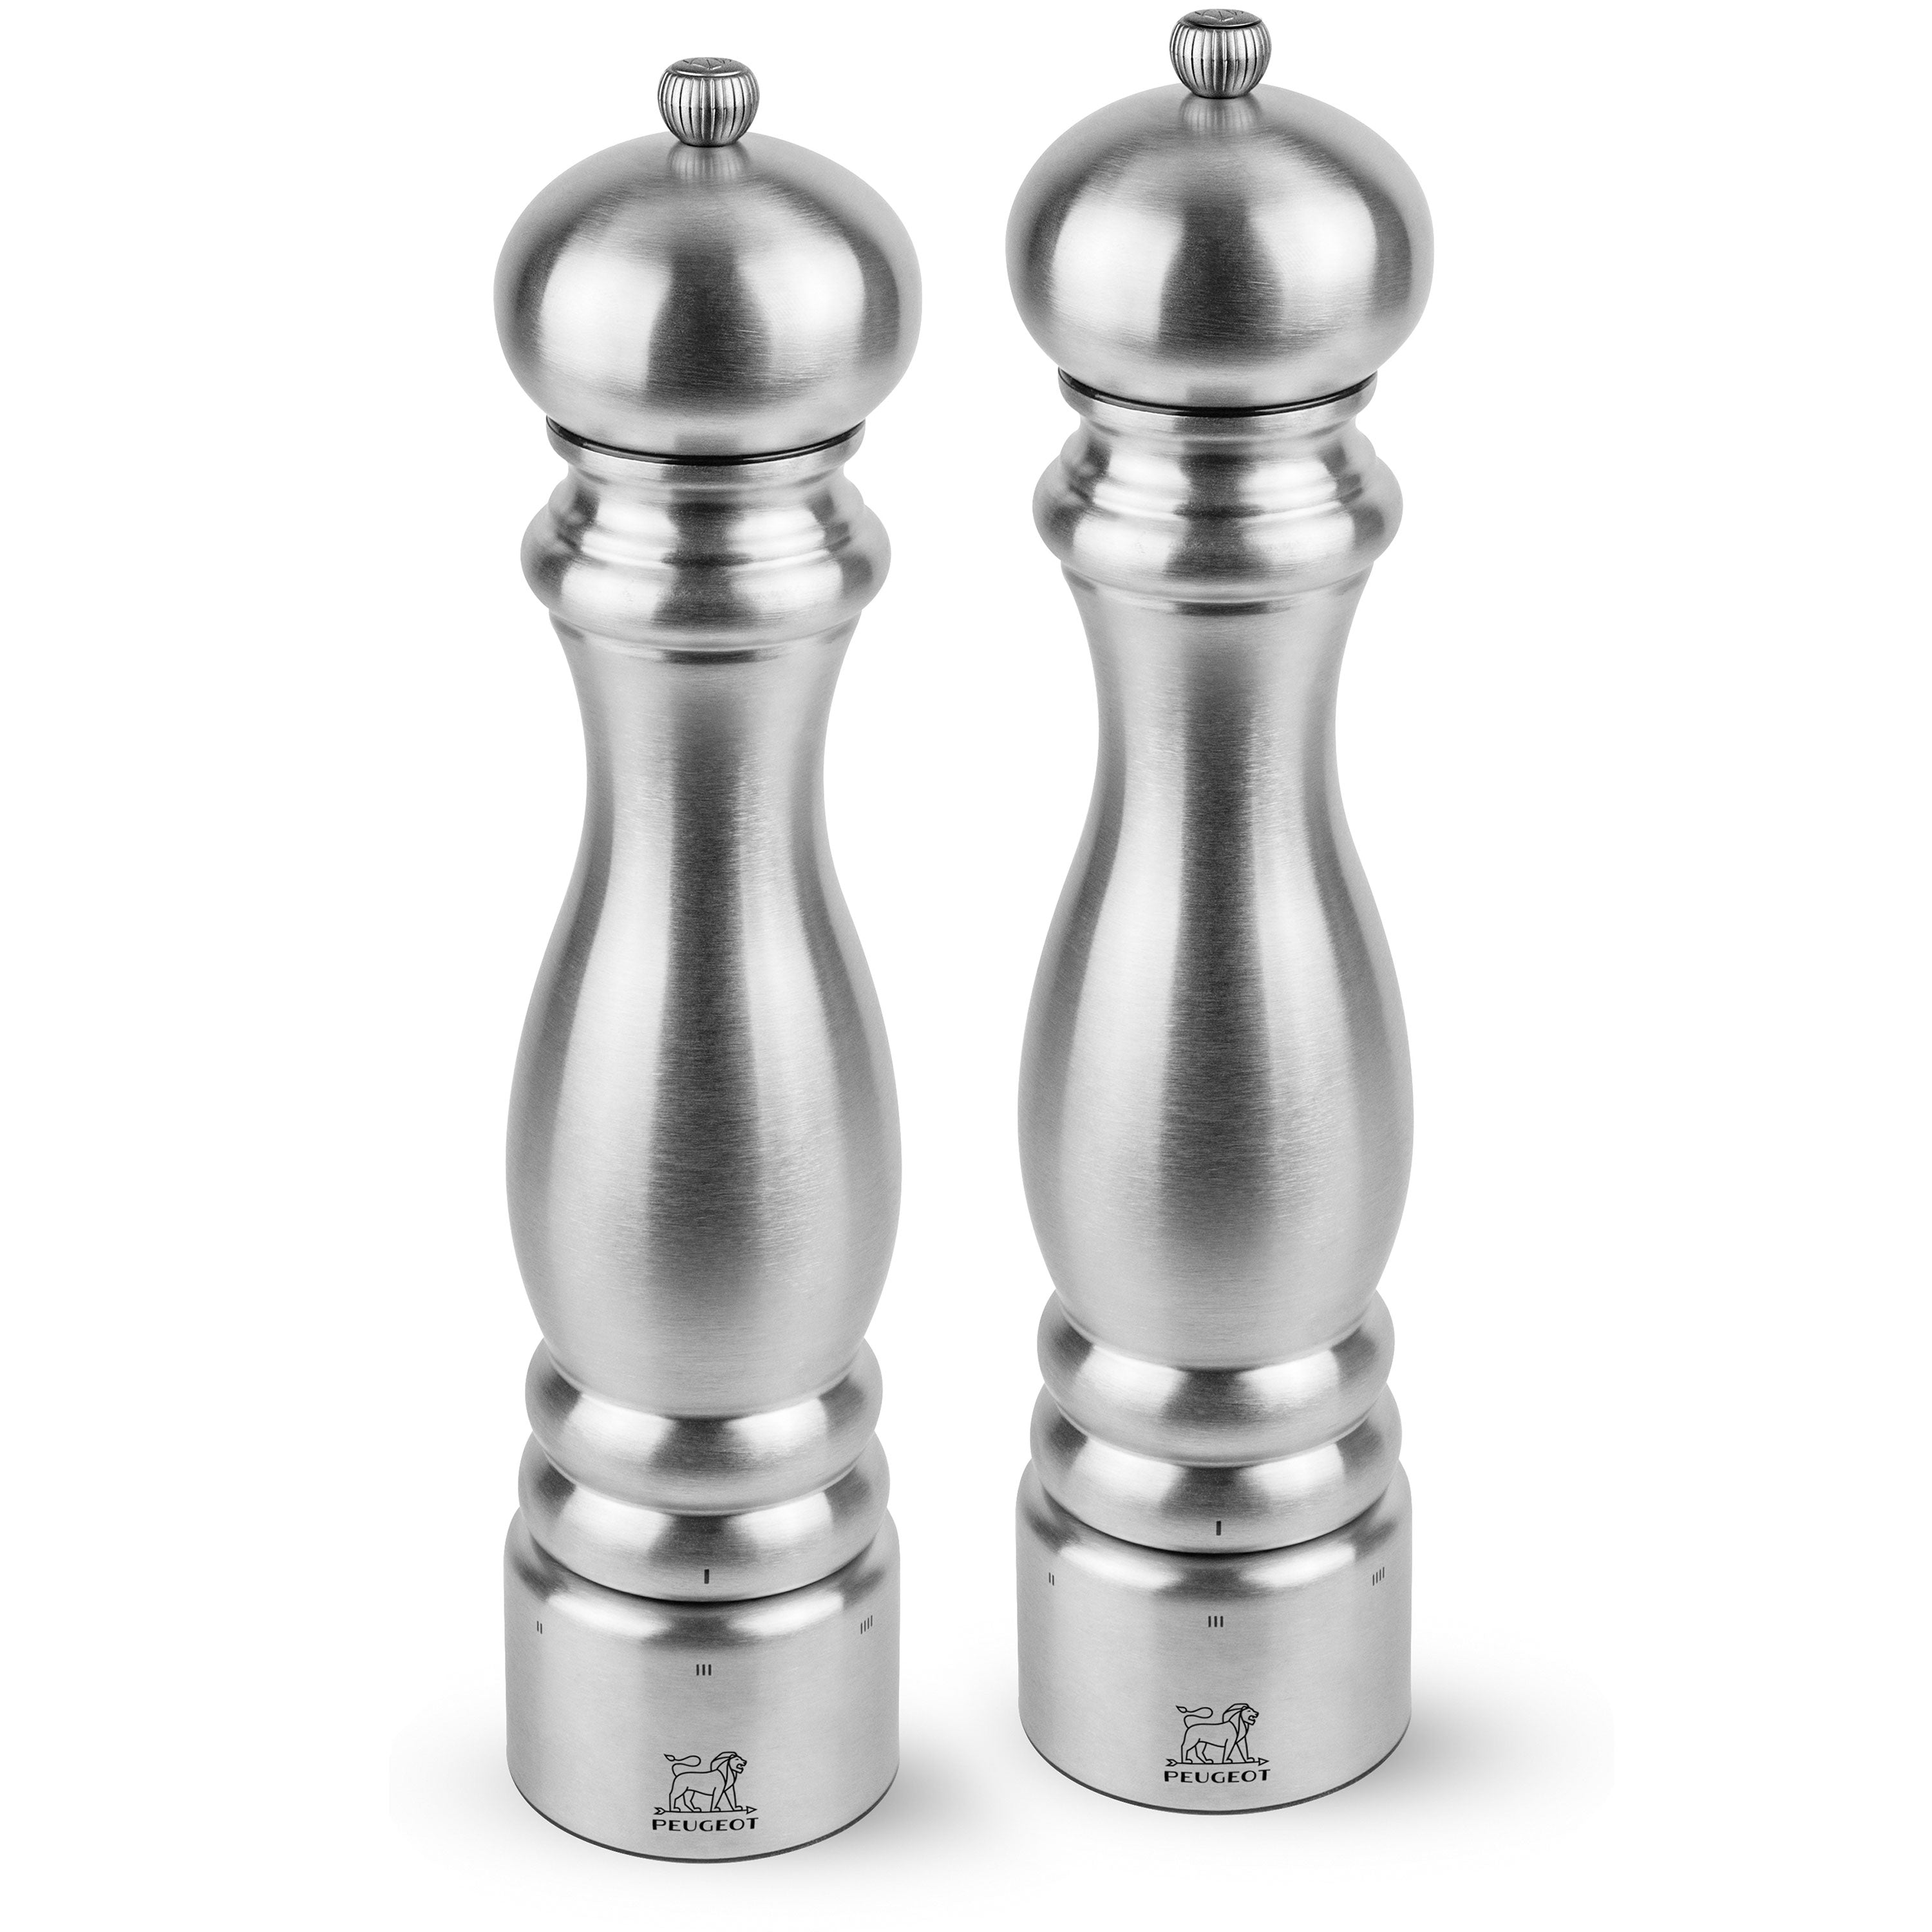 Set of 2 Salt and Pepper Grinder with stainless steel top and